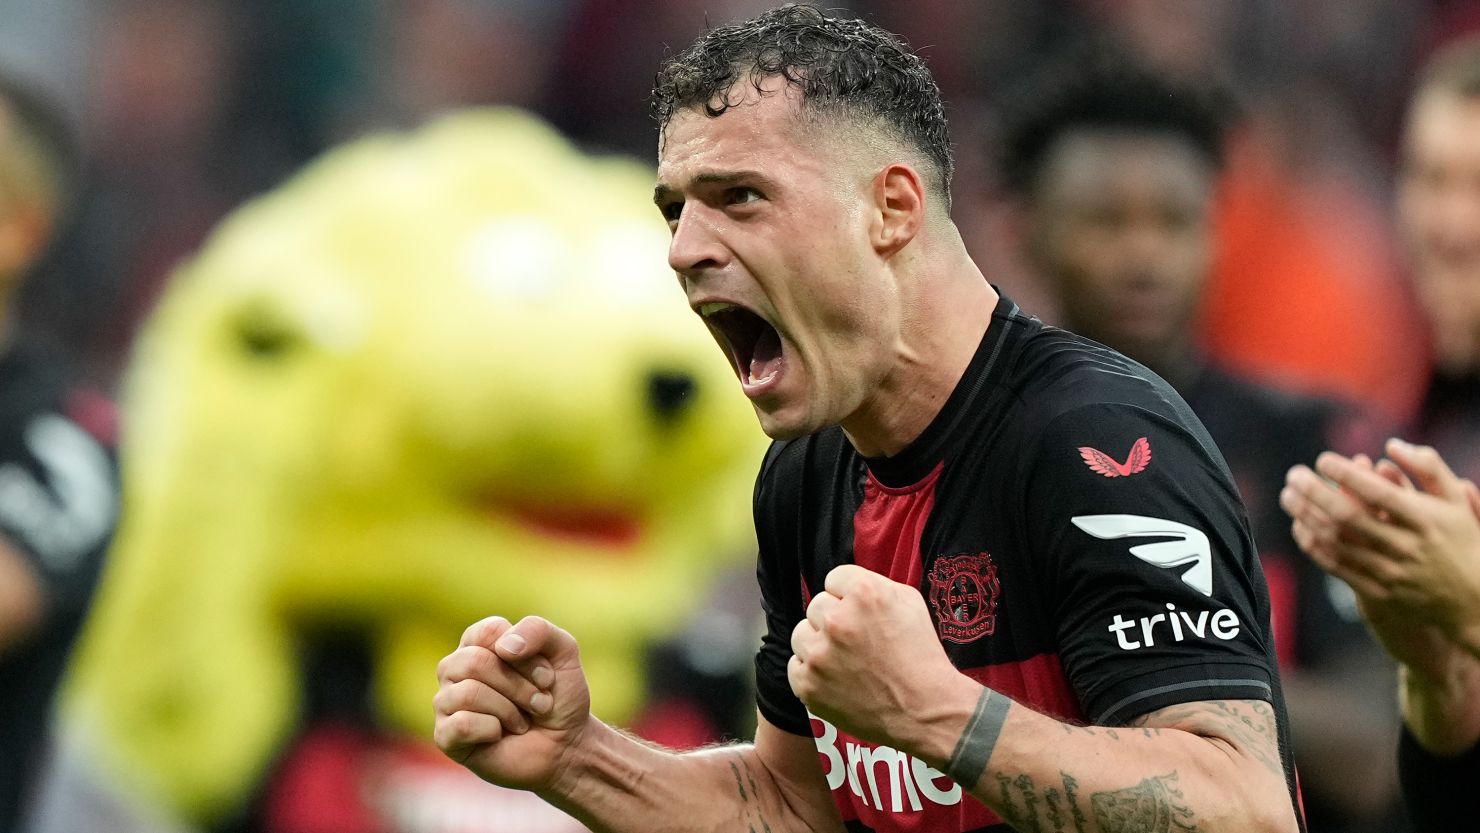 Bayer Leverkusen's Granit Xhaka celebrates after completing a comeback victory against Hoffenheim on Saturday.